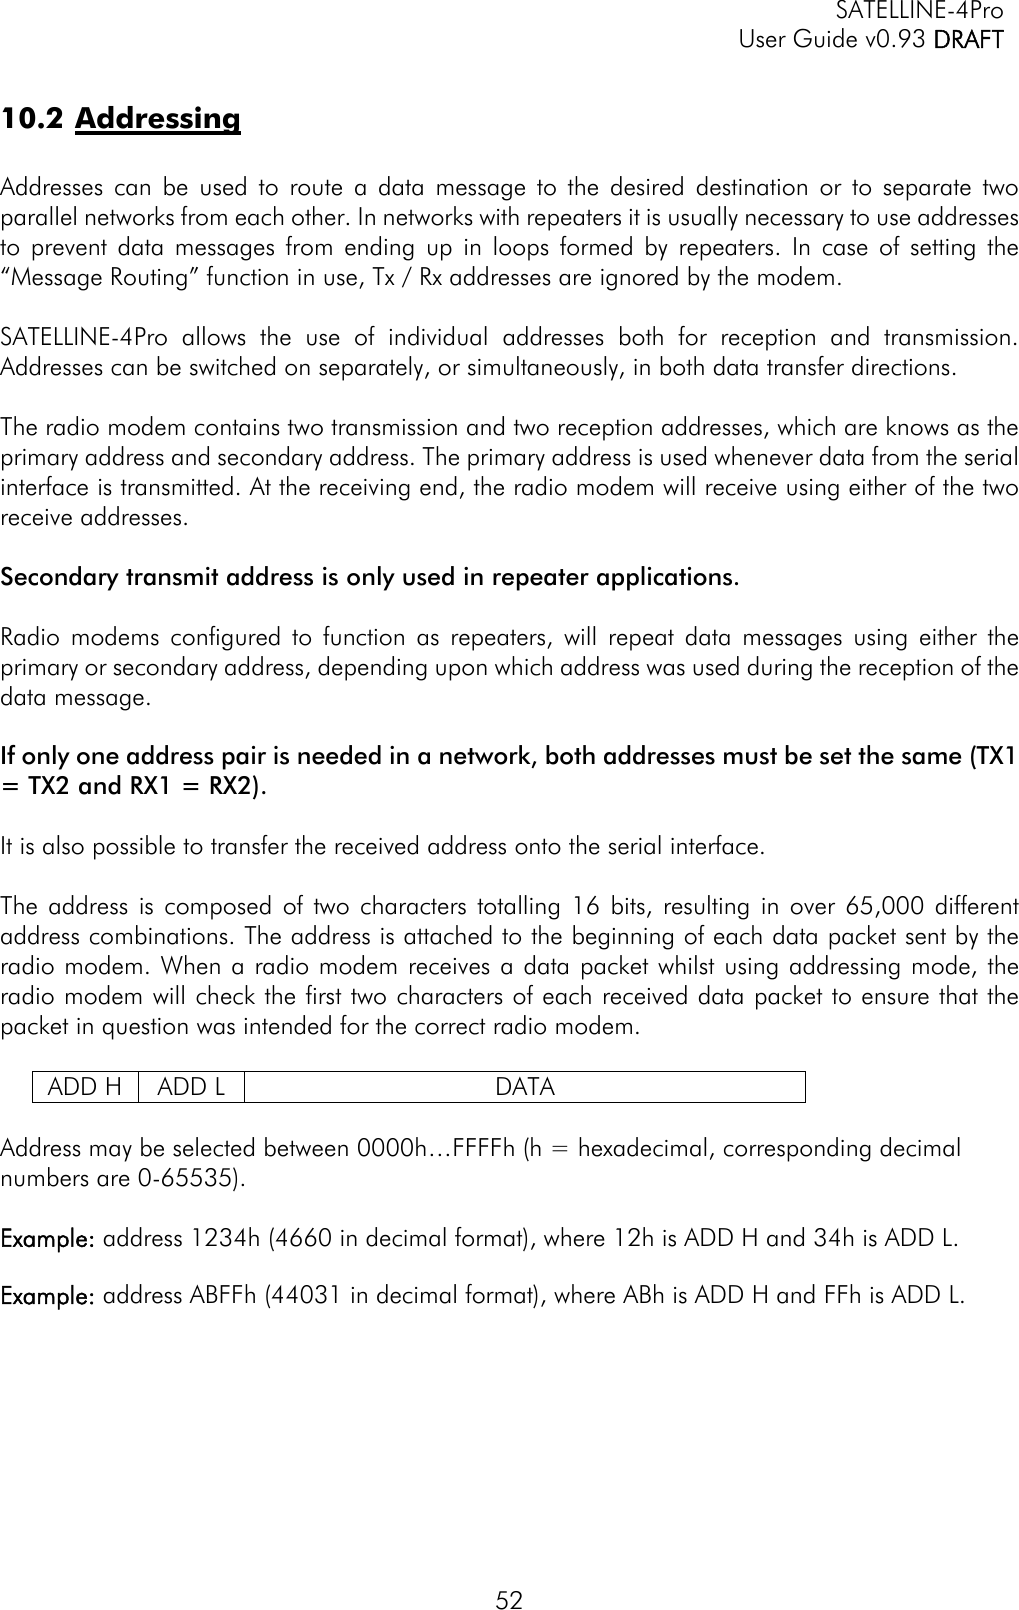   SATELLINE-4Pro   User Guide v0.93 DRAFT 52 10.2 Addressing  Addresses can be used to route a data message to the desired destination or to separate two parallel networks from each other. In networks with repeaters it is usually necessary to use addresses to prevent data messages from ending up in loops formed by repeaters. In case of setting the “Message Routing” function in use, Tx / Rx addresses are ignored by the modem.  SATELLINE-4Pro allows the use of individual addresses both for reception and transmission. Addresses can be switched on separately, or simultaneously, in both data transfer directions.   The radio modem contains two transmission and two reception addresses, which are knows as the primary address and secondary address. The primary address is used whenever data from the serial interface is transmitted. At the receiving end, the radio modem will receive using either of the two receive addresses.   Secondary transmit address is only used in repeater applications.  Radio modems configured to function as repeaters, will repeat data messages using either the primary or secondary address, depending upon which address was used during the reception of the data message.   If only one address pair is needed in a network, both addresses must be set the same (TX1 = TX2 and RX1 = RX2).  It is also possible to transfer the received address onto the serial interface.  The address is composed of two characters totalling 16 bits, resulting in over 65,000 different address combinations. The address is attached to the beginning of each data packet sent by the radio modem. When a radio modem receives a data packet whilst using addressing mode, the radio modem will check the first two characters of each received data packet to ensure that the packet in question was intended for the correct radio modem.  ADD H  ADD L  DATA  Address may be selected between 0000h…FFFFh (h = hexadecimal, corresponding decimal numbers are 0-65535).   Example: address 1234h (4660 in decimal format), where 12h is ADD H and 34h is ADD L.  Example: address ABFFh (44031 in decimal format), where ABh is ADD H and FFh is ADD L.  